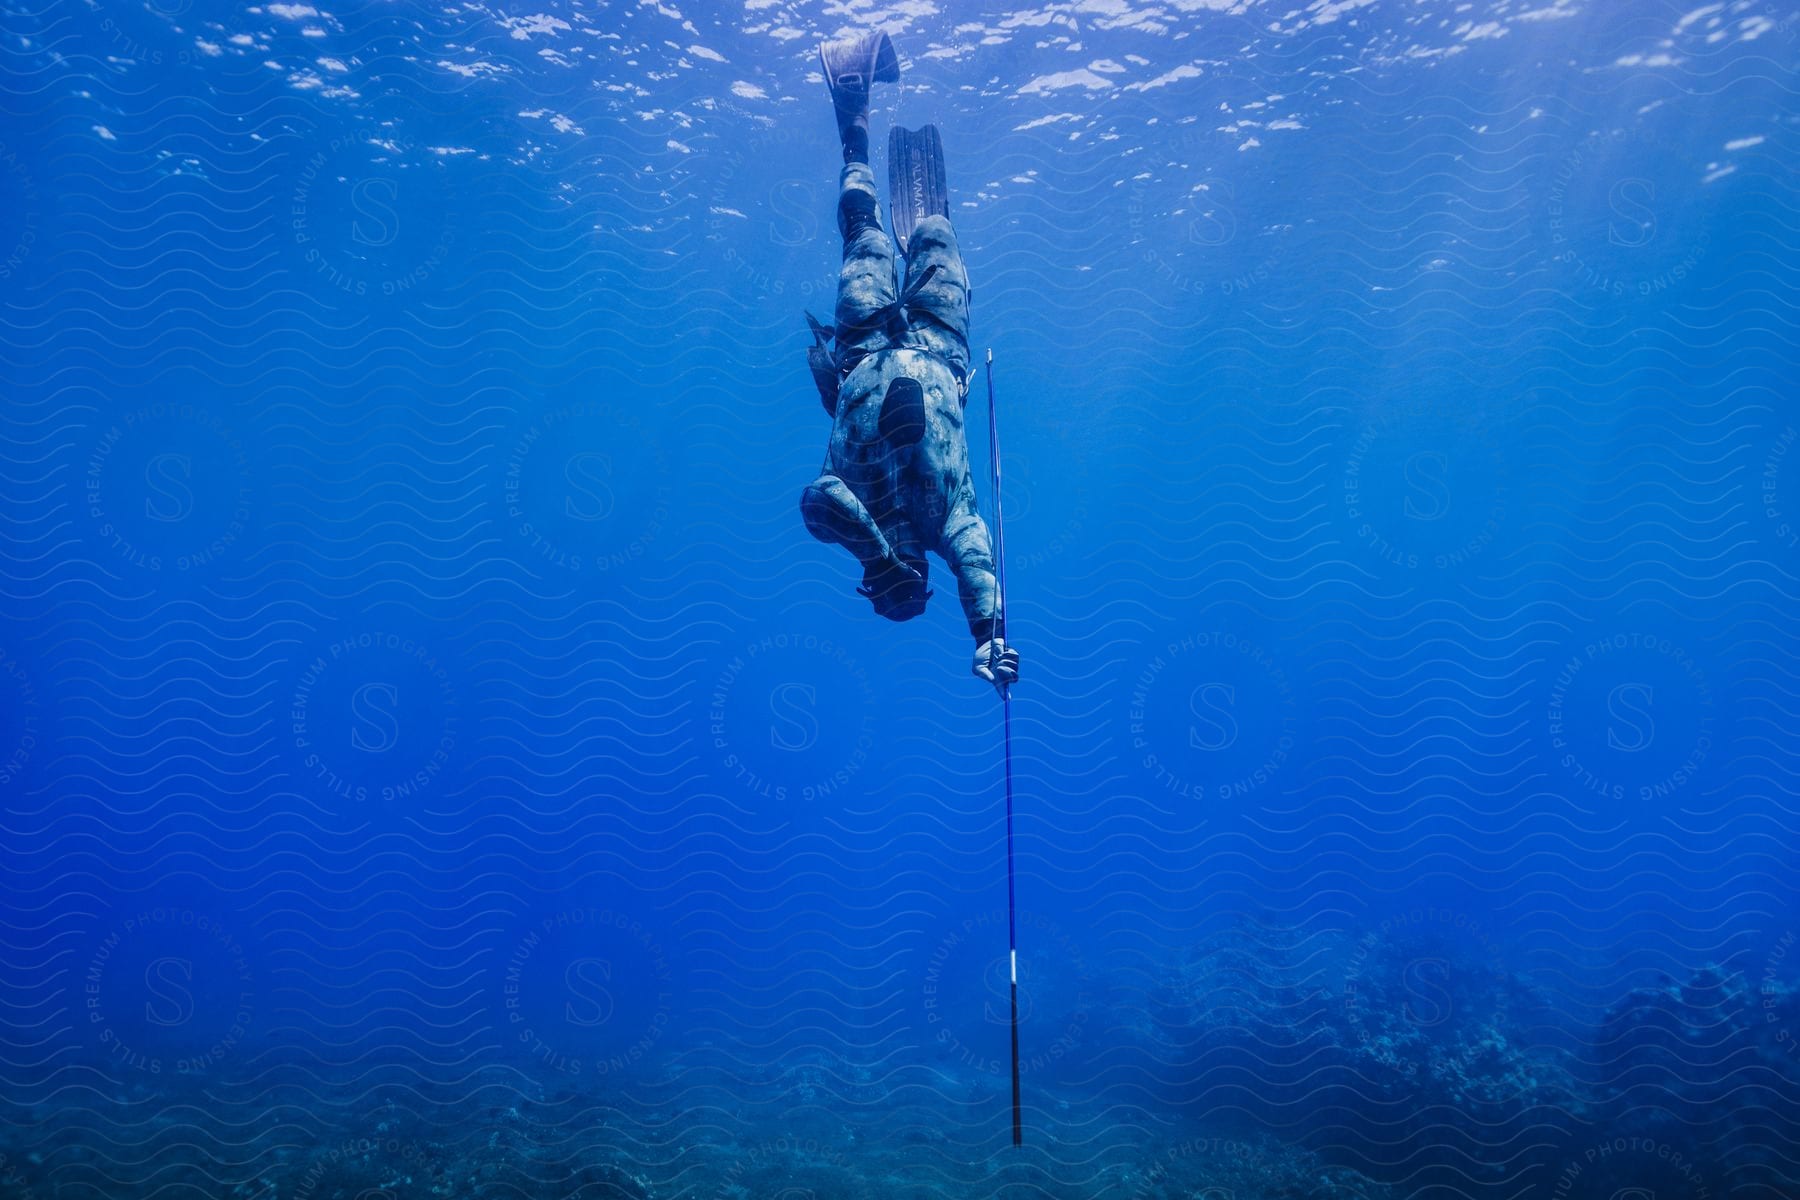 A person diving to the bottom of the bright blue sea with flippers on